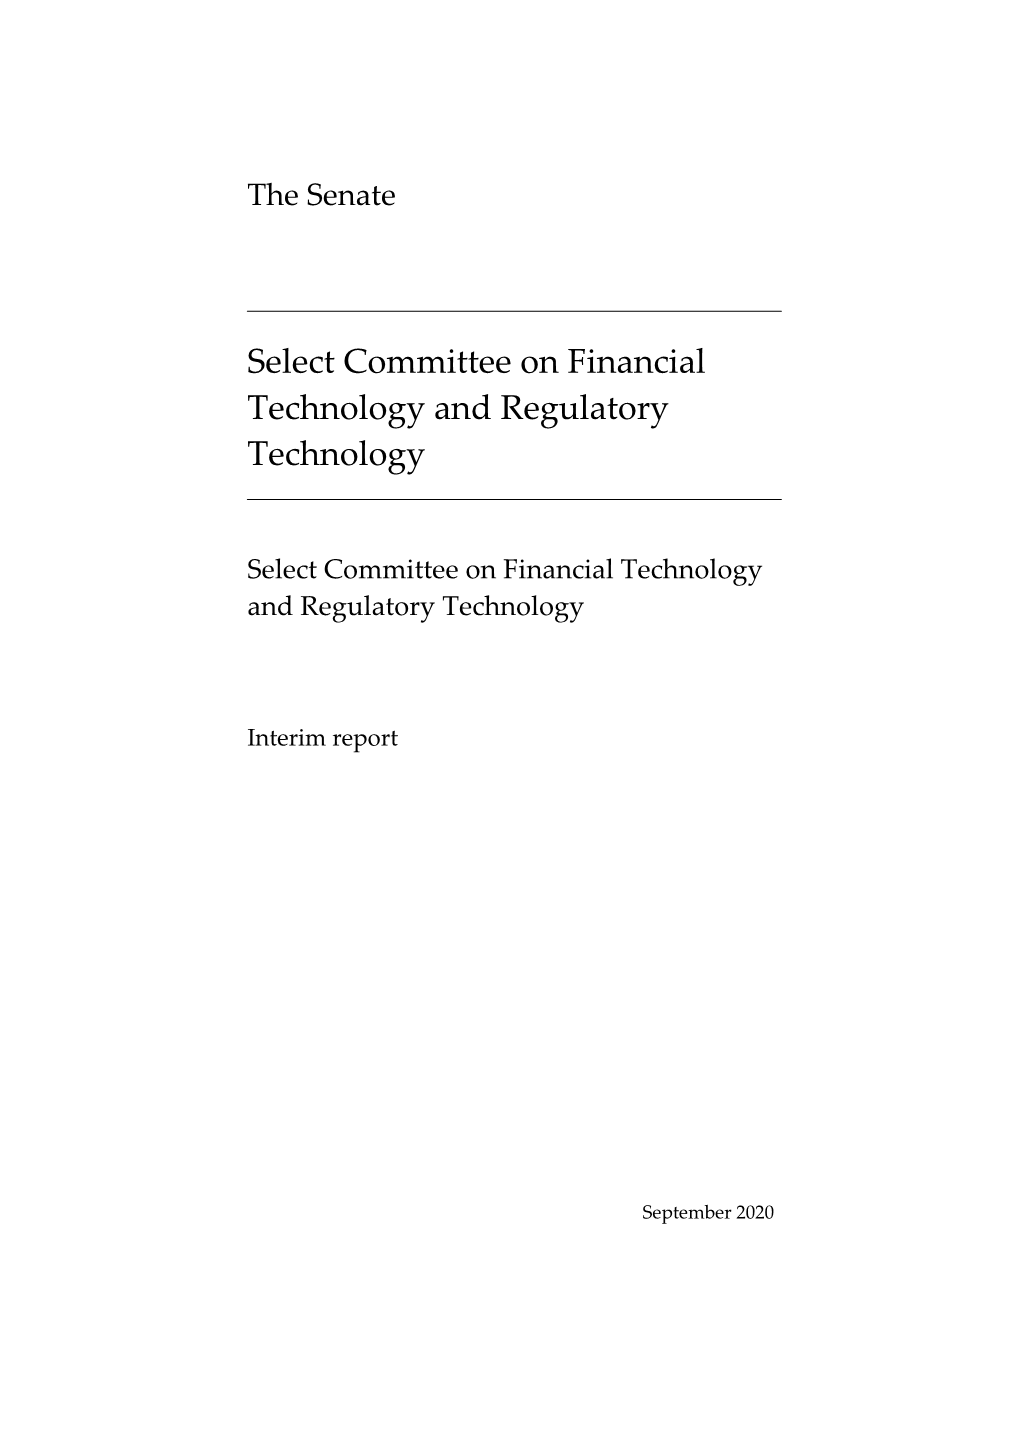 Select Committee on Financial Technology and Regulatory Technology